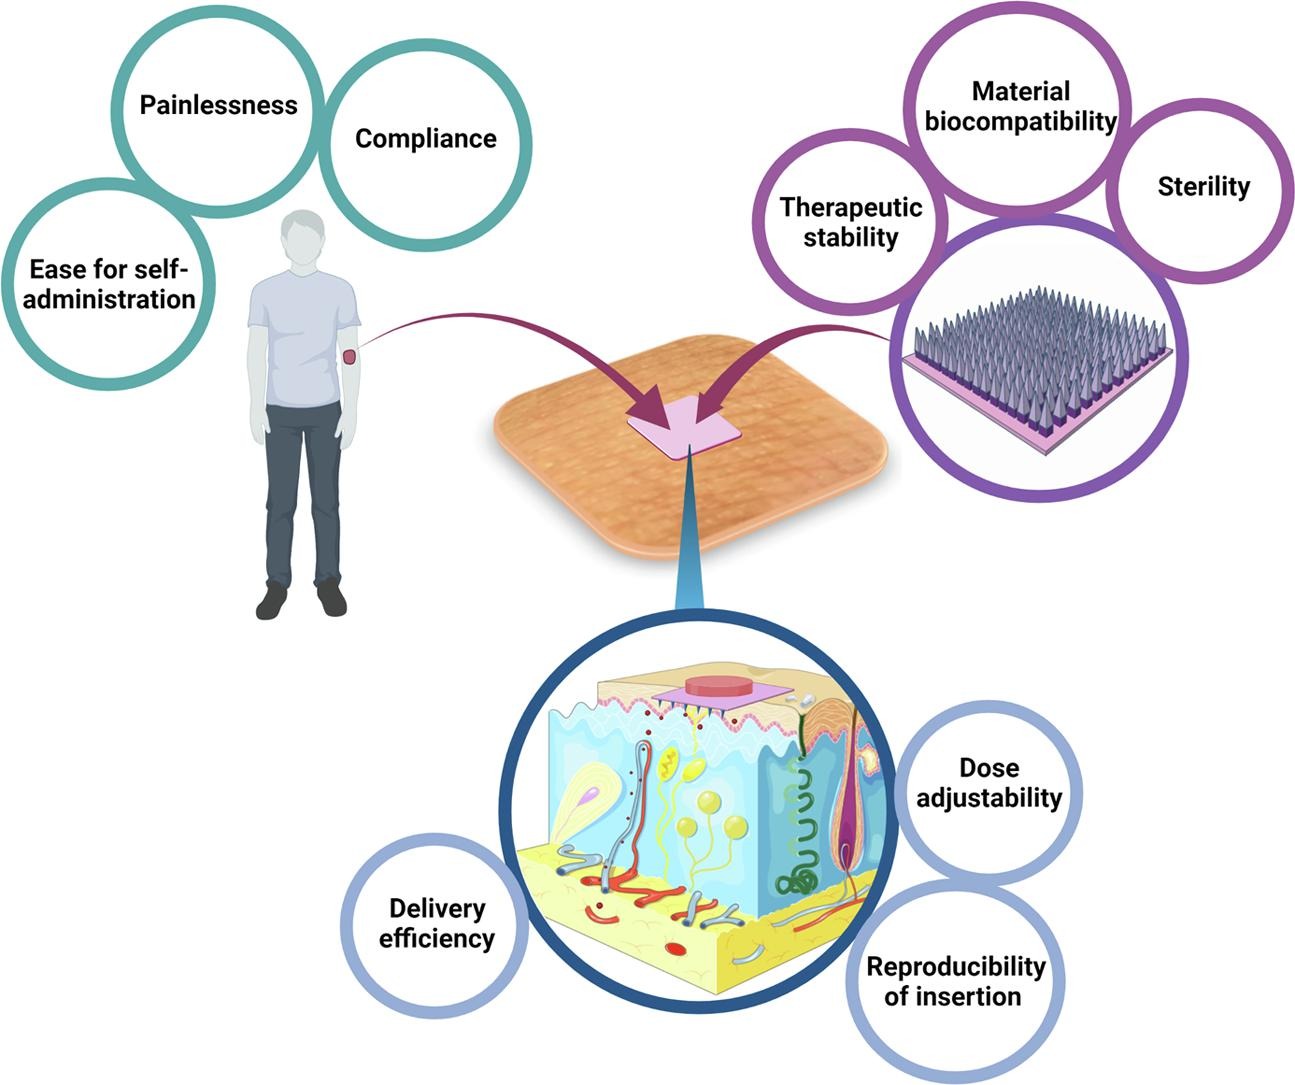 The clinical and translational prospects of microneedle devices, with a focus on insulin therapy for diabetes mellitus as a case study